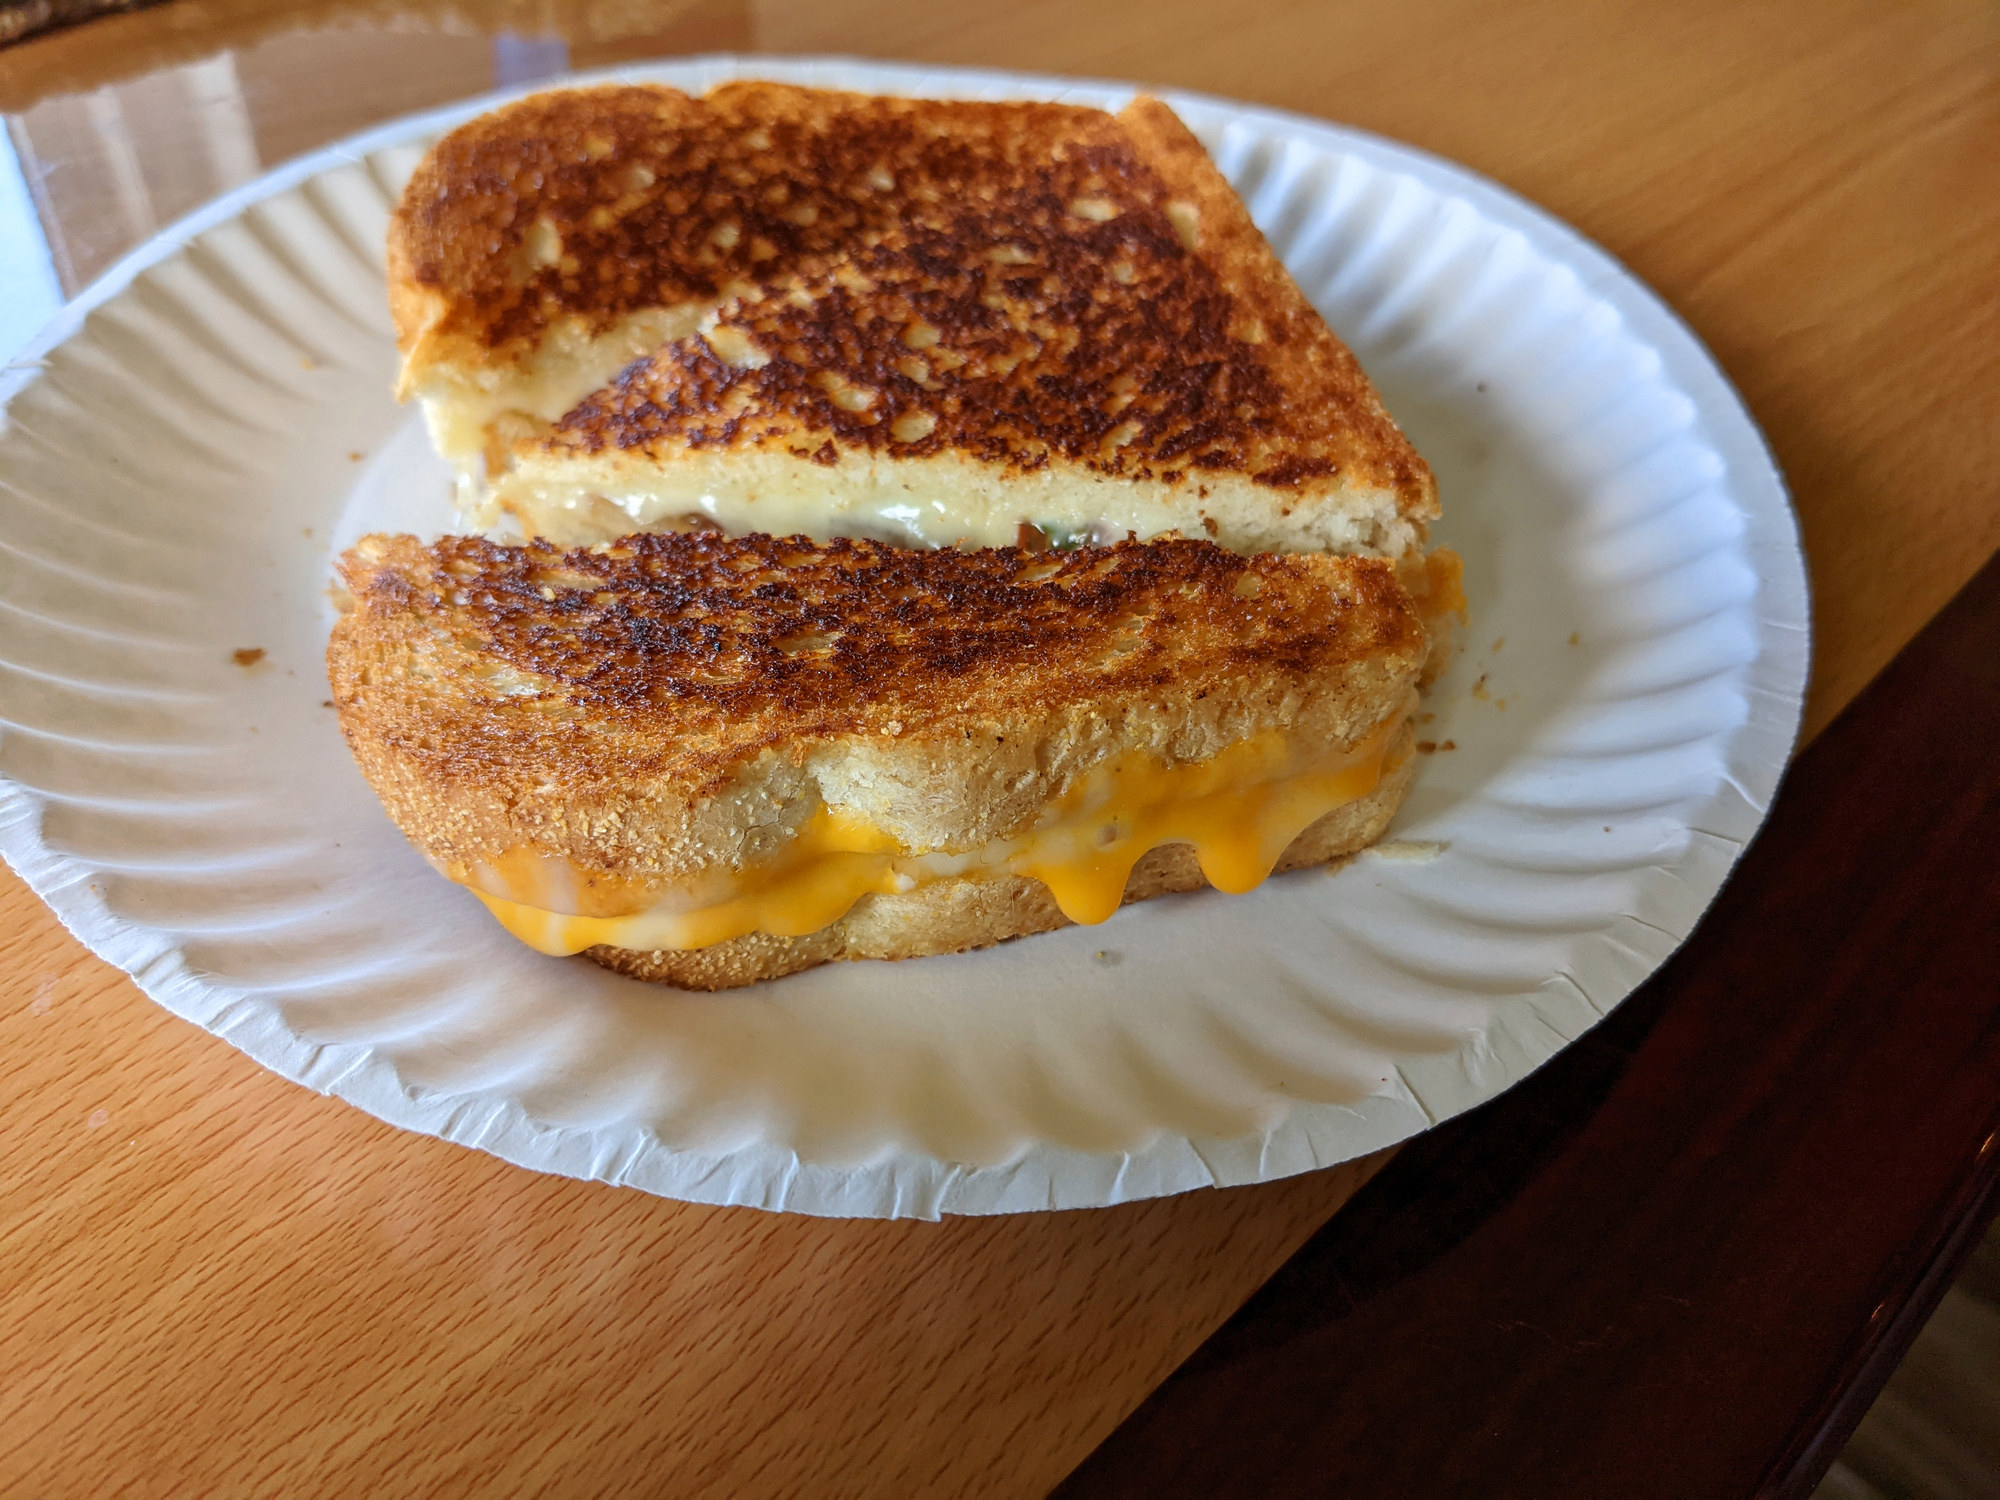 Perfectly grilled cheese sandwich with cheese oozing out the sides